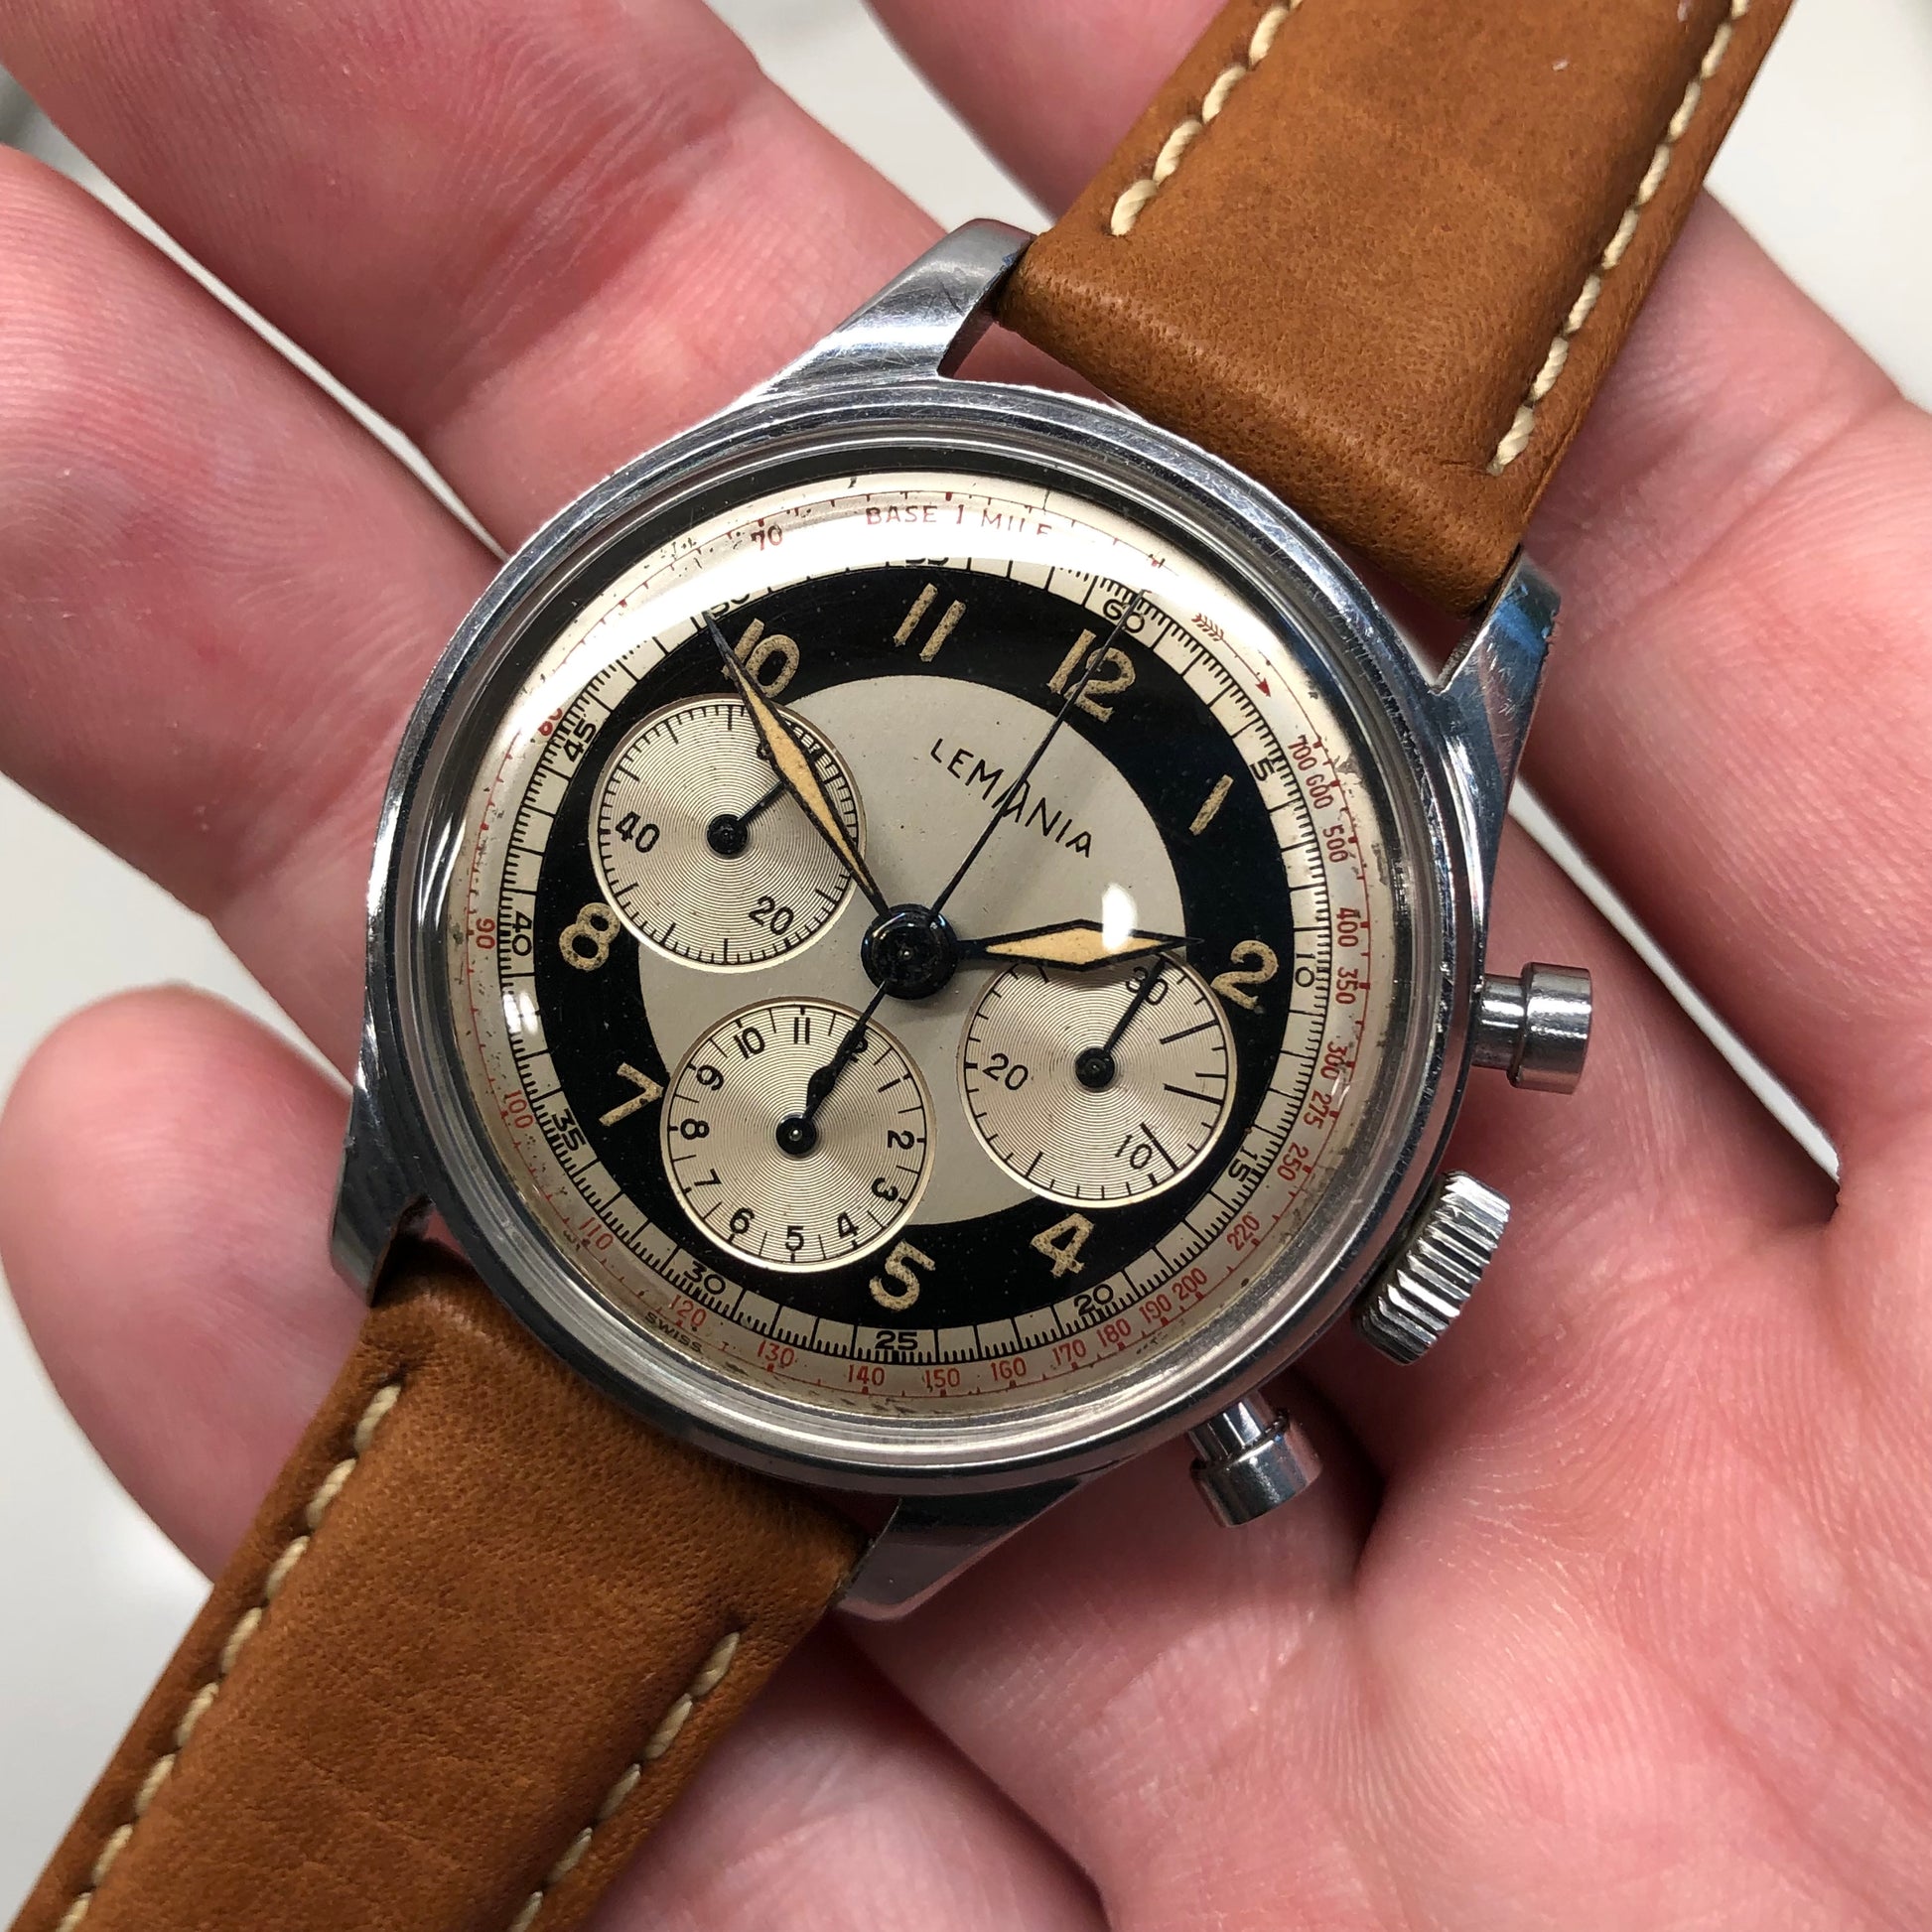 1950s Lemania Exotic Multiscale Dial 27CH Stainnless Steel Chronograph Wristwatch - Hashtag Watch Company